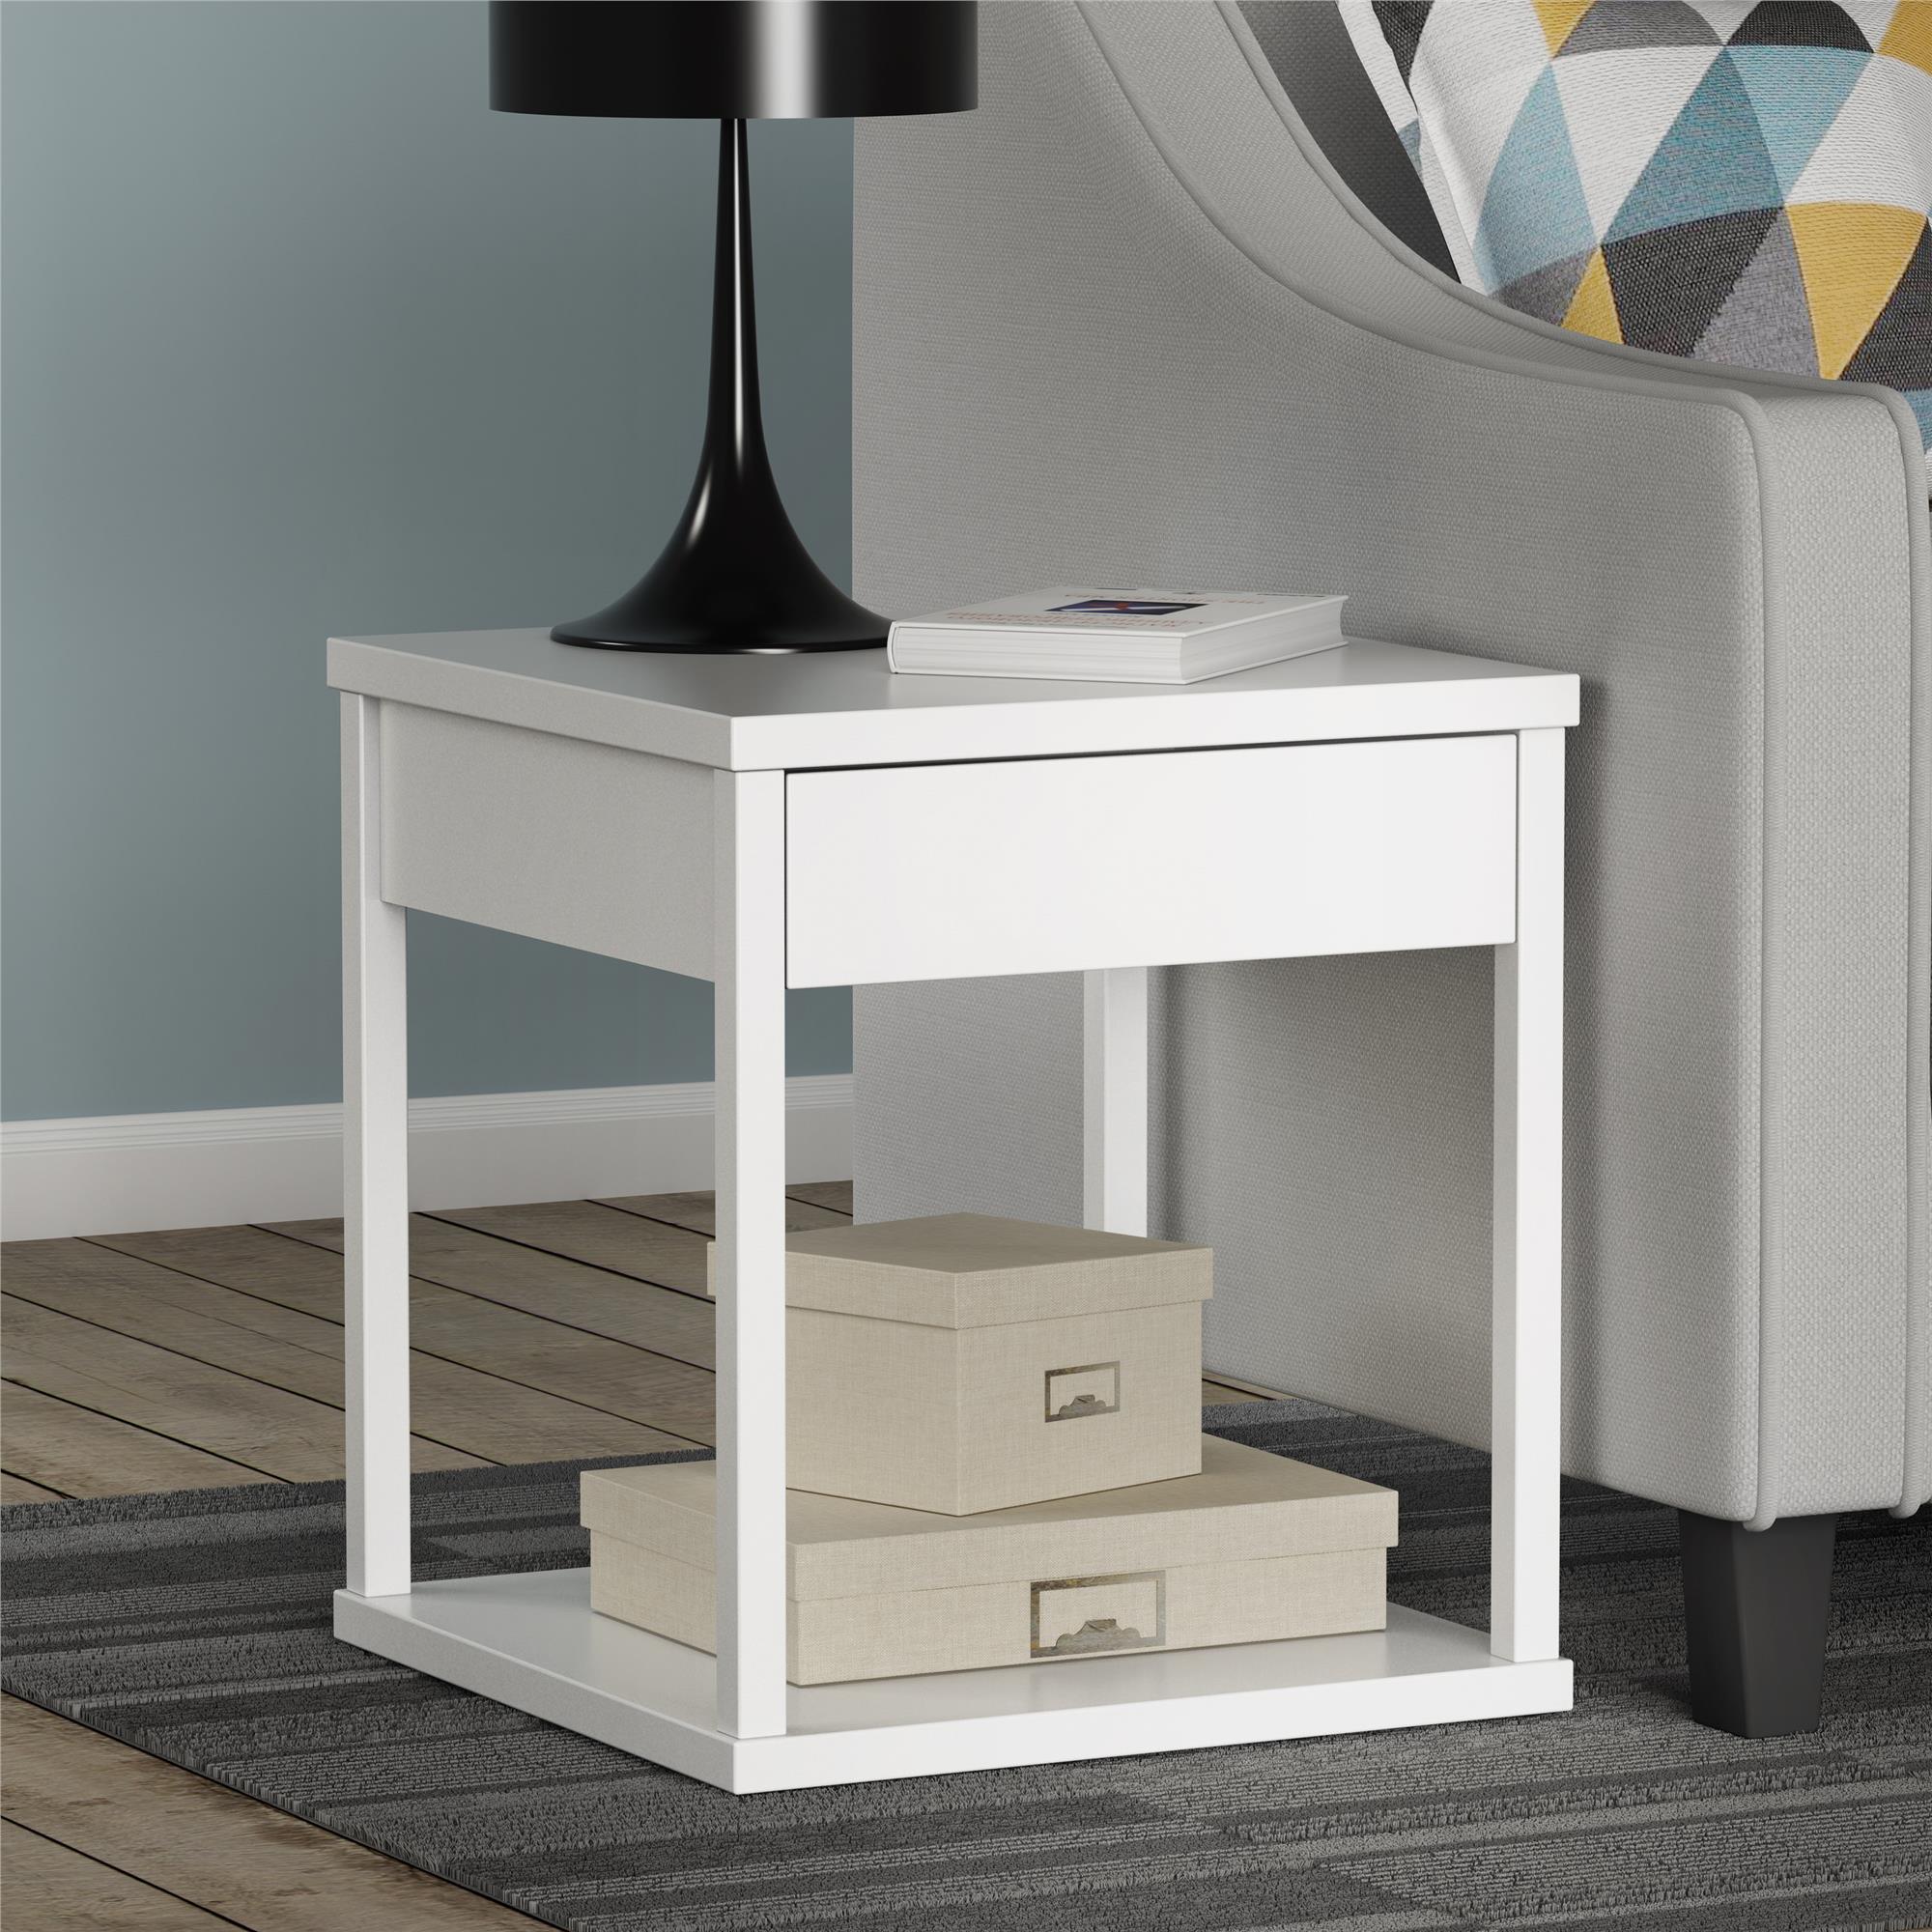 Dorel End Table With Drawers White